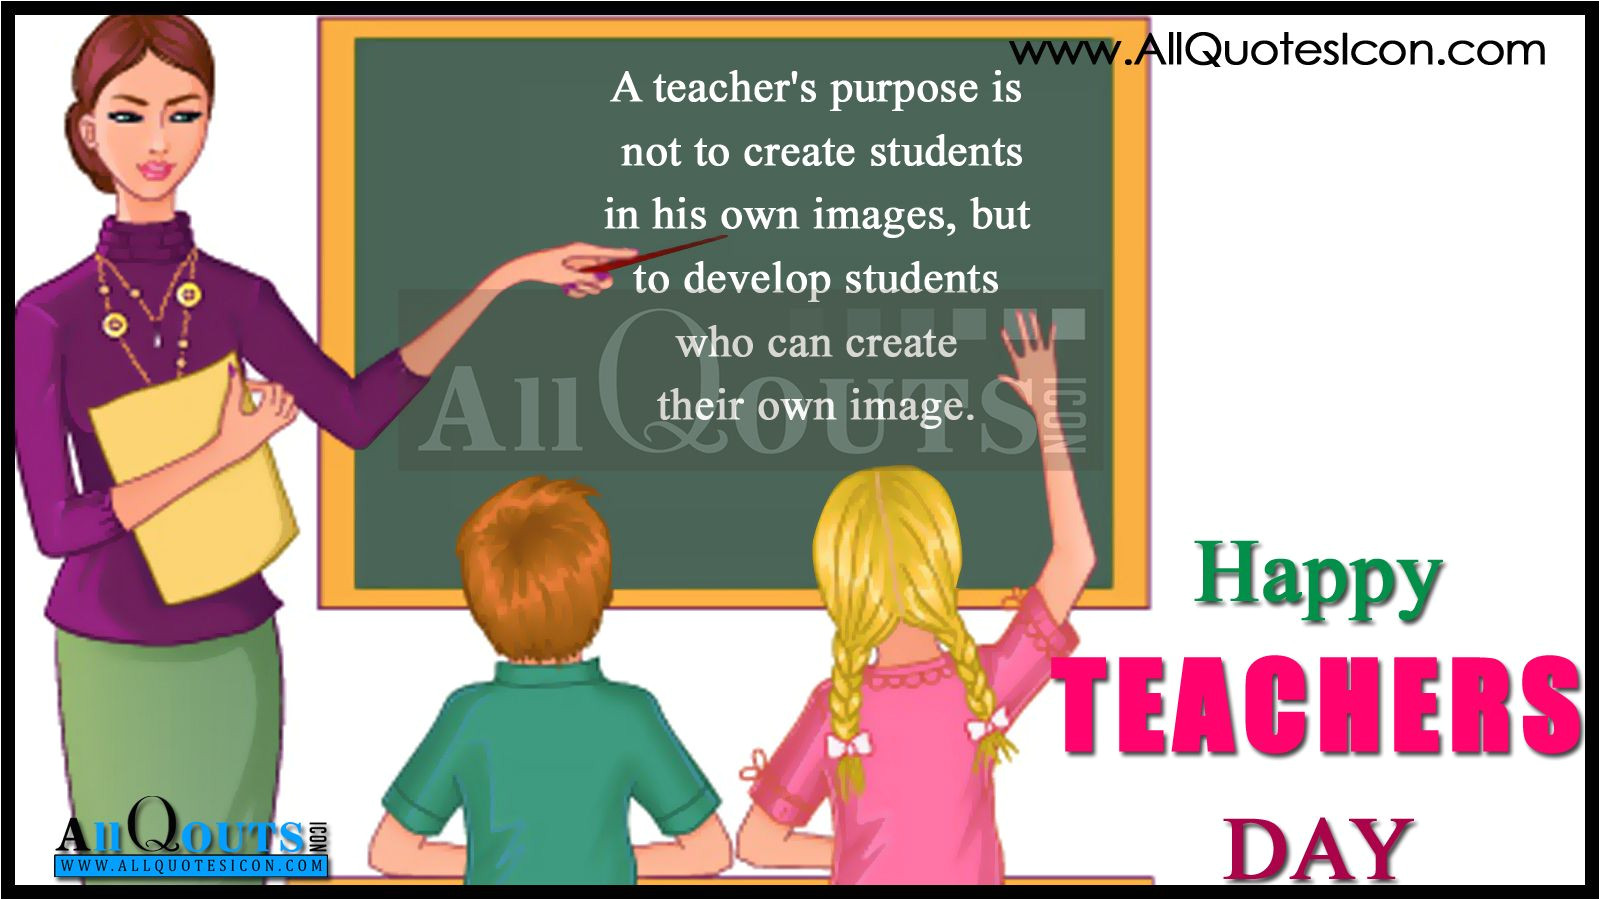 Teachers Day Card for English Teacher 33 Teacher Day Messages to Honor Our Teachers From Students